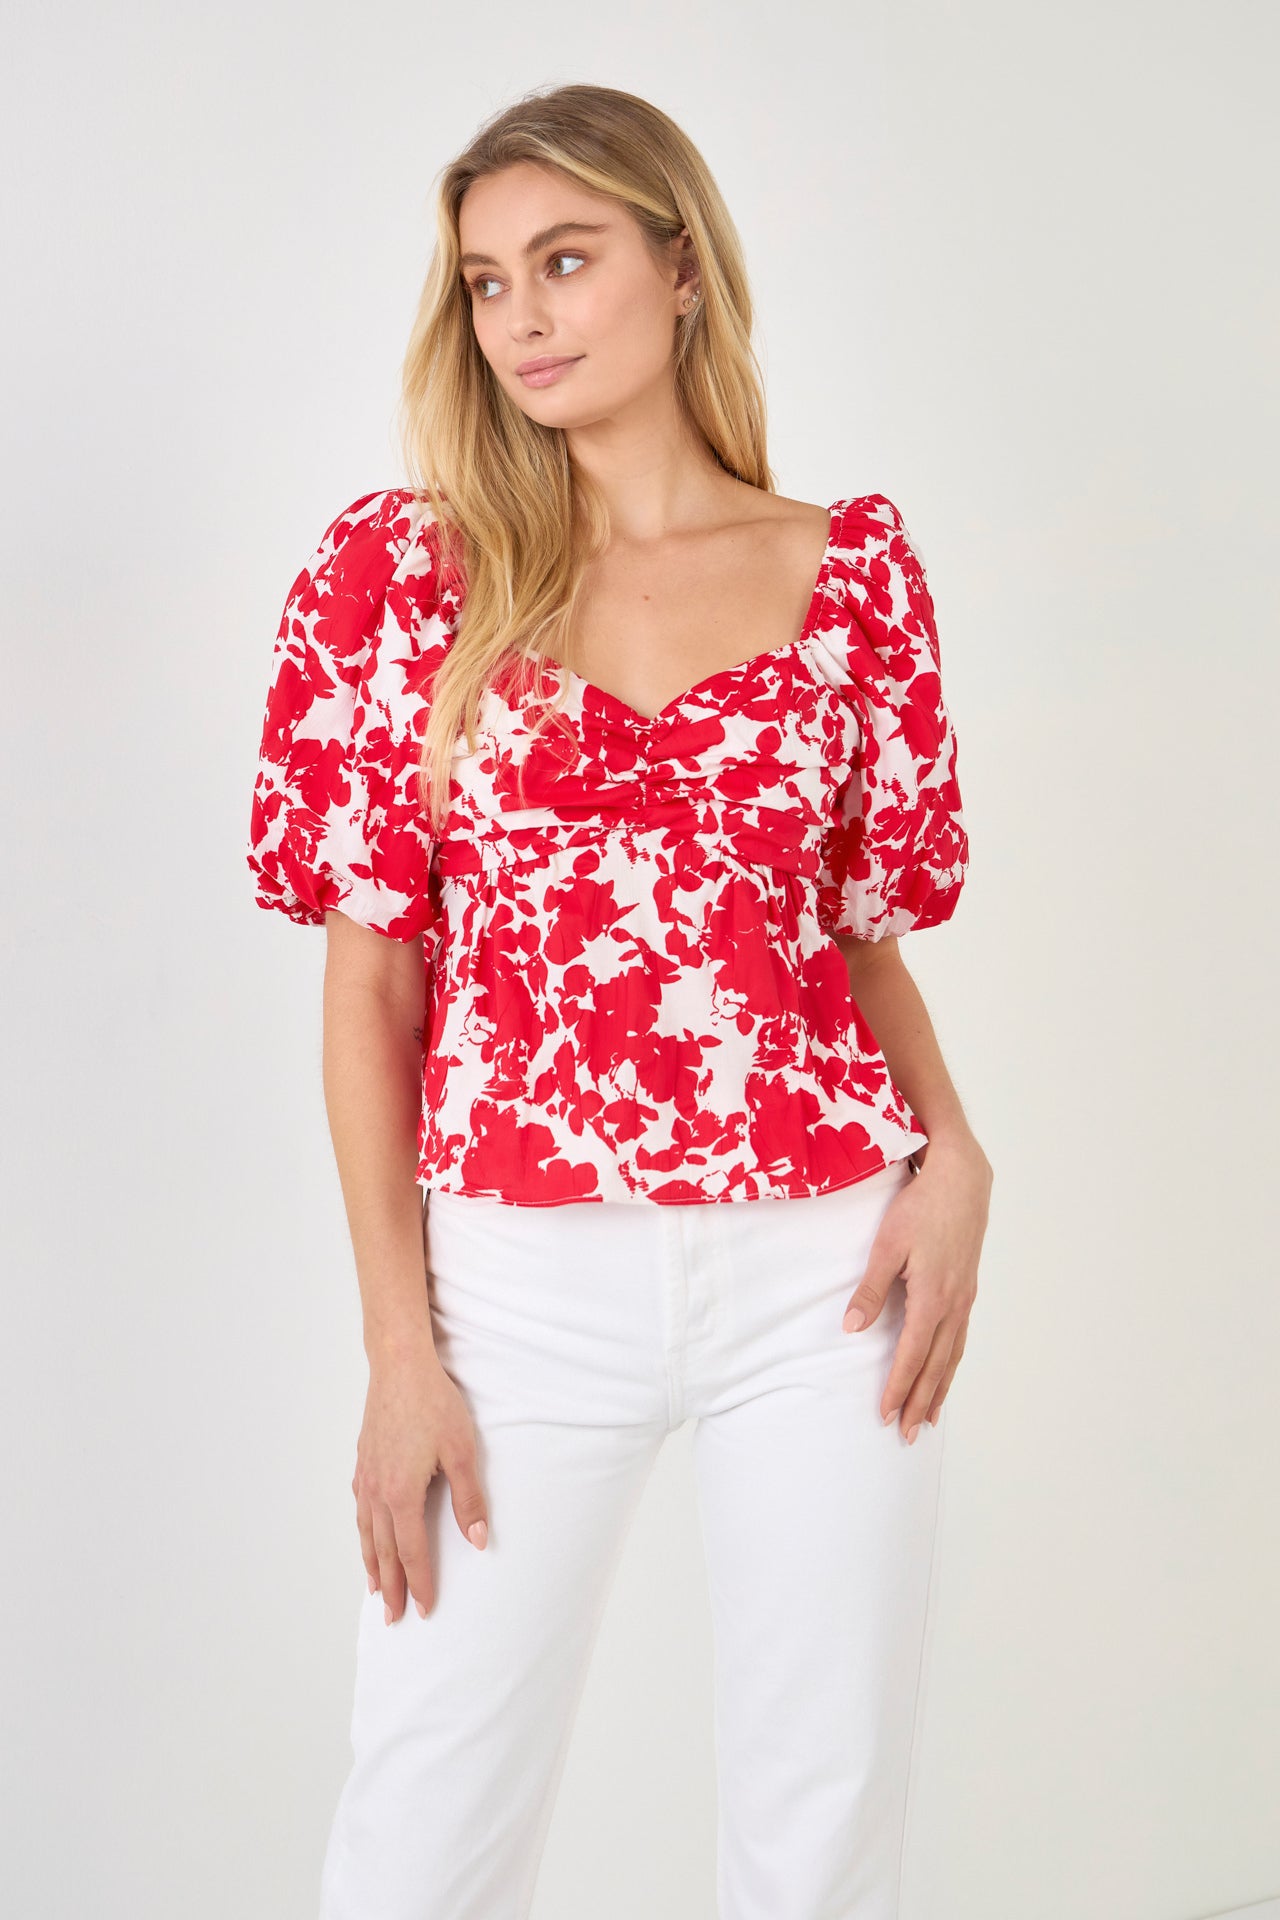 FREE THE ROSES - Floral Tied Back Top - TOPS available at Objectrare